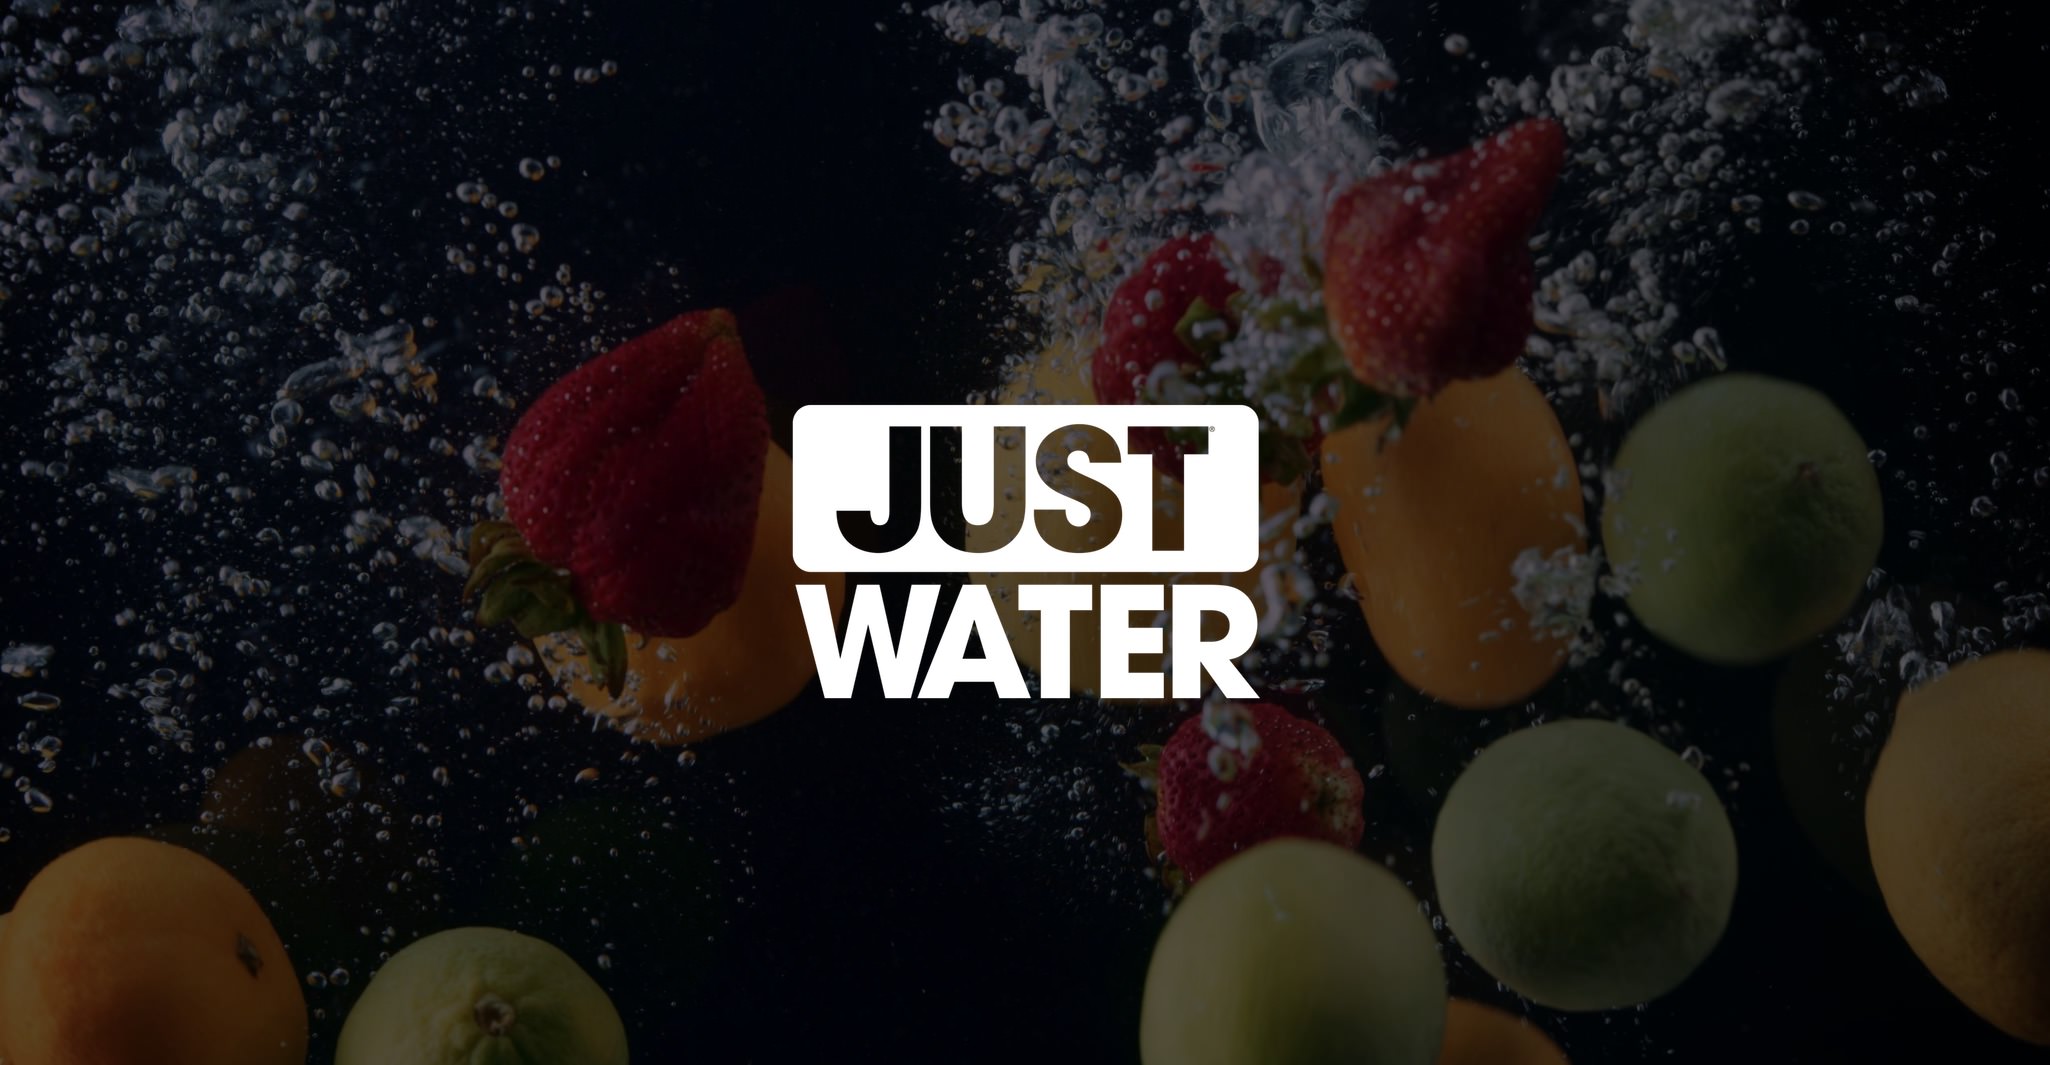 White Just Water logo with dimmed background of fruit underwater with bubbles